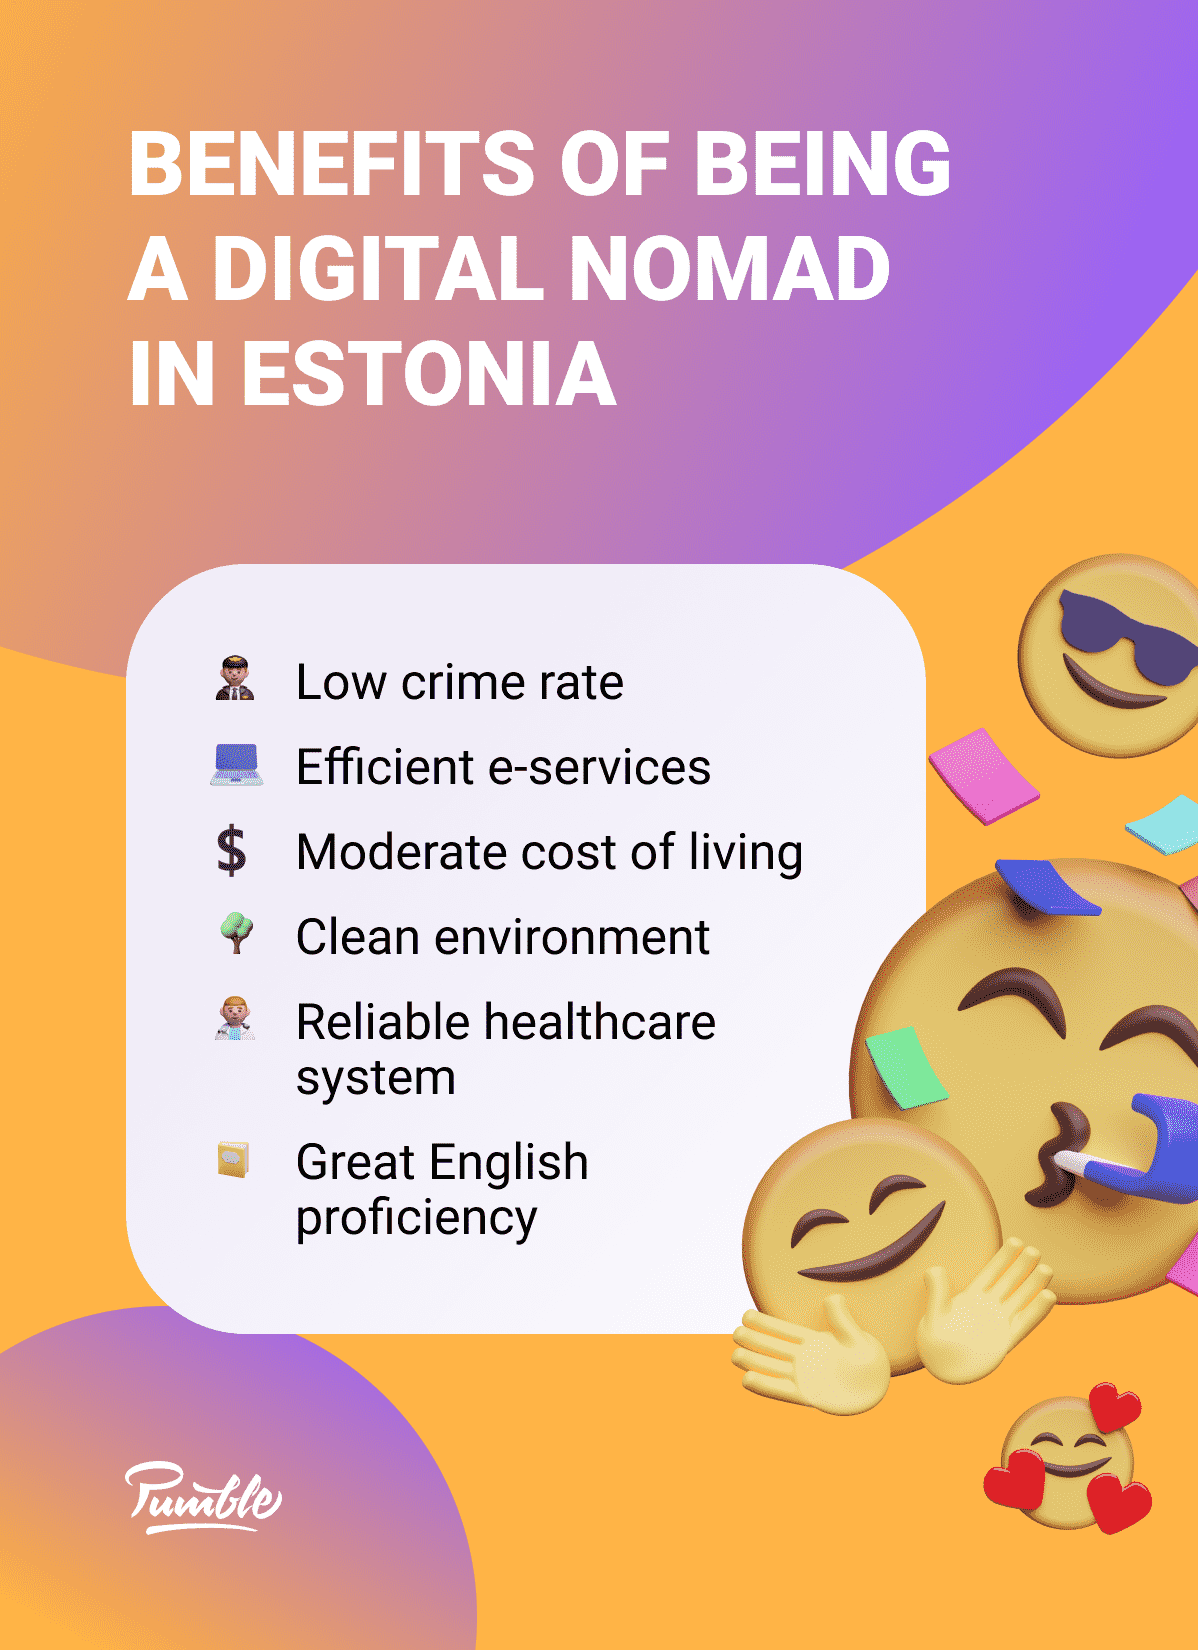 Benefits of being a digital nomad in Estonia